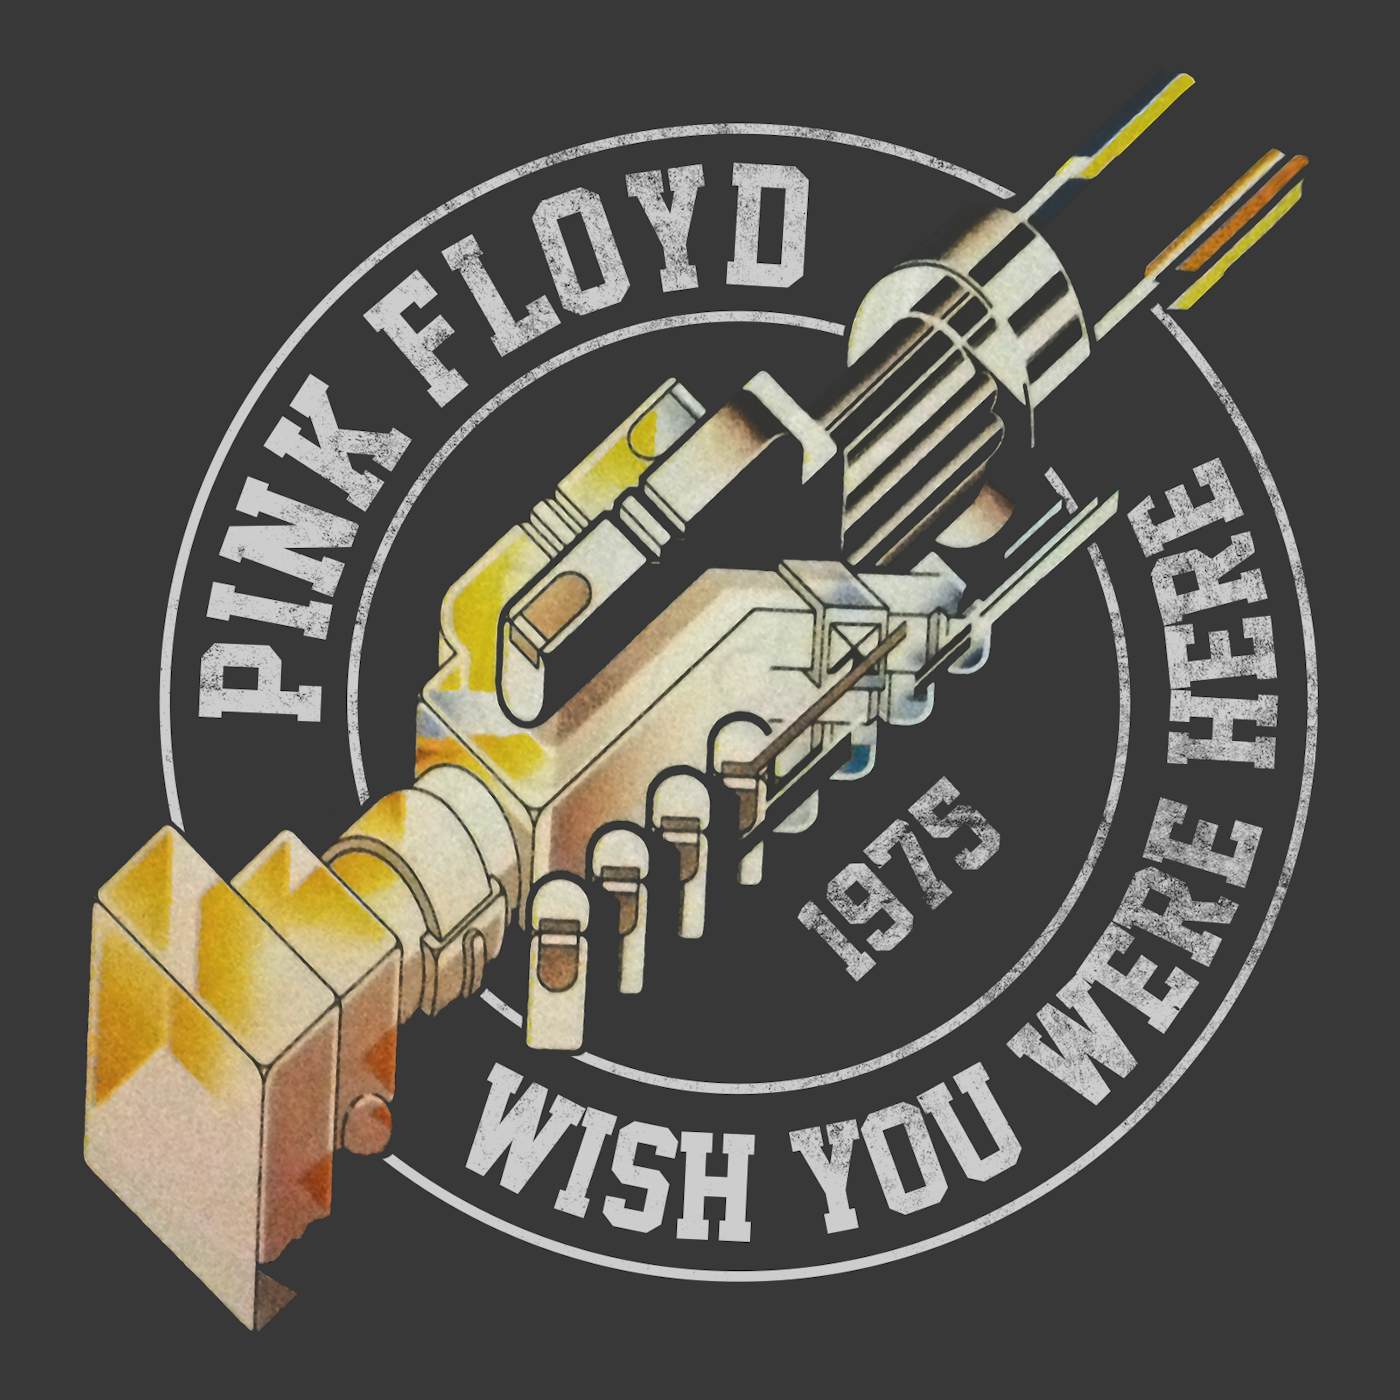 Pink \'75 Here Pink T-Shirt Floyd Were | You Tour Wish (Reissue) Floyd Shirt